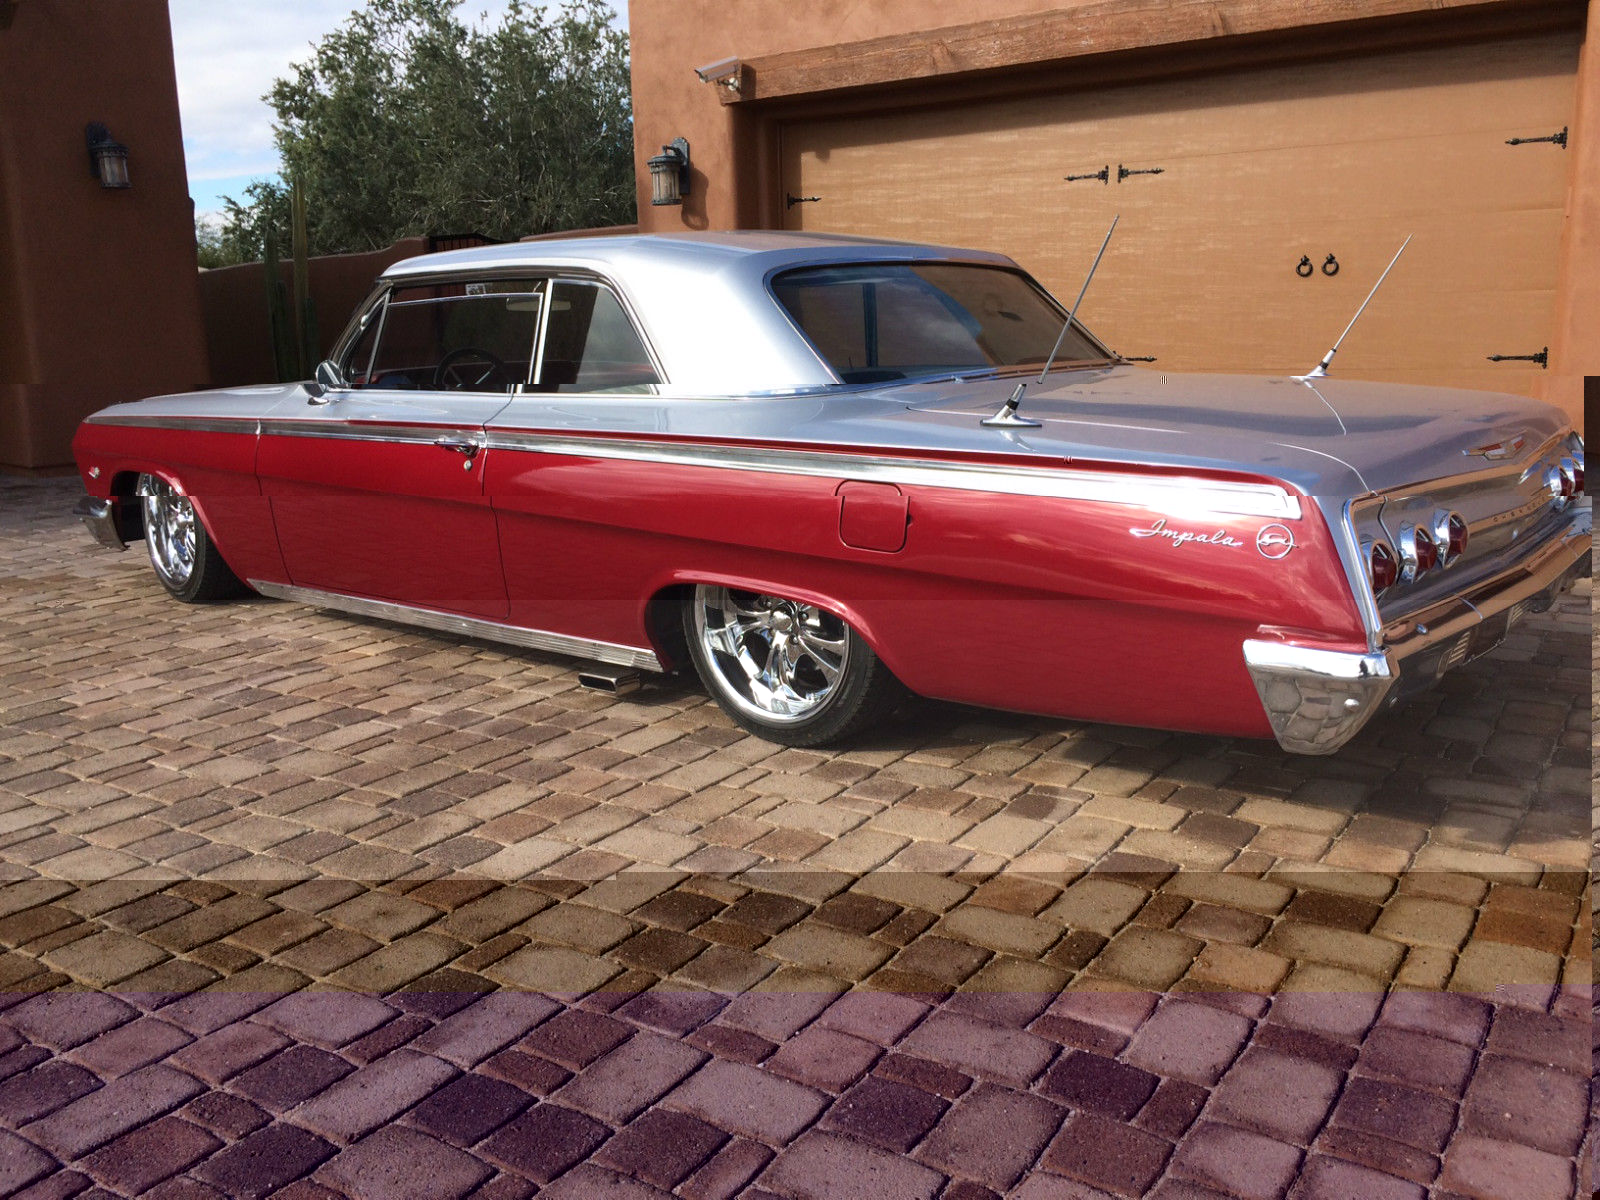 1962 Chevrolet Impala, Restored, Awesome Paint, Air Ride Bagged